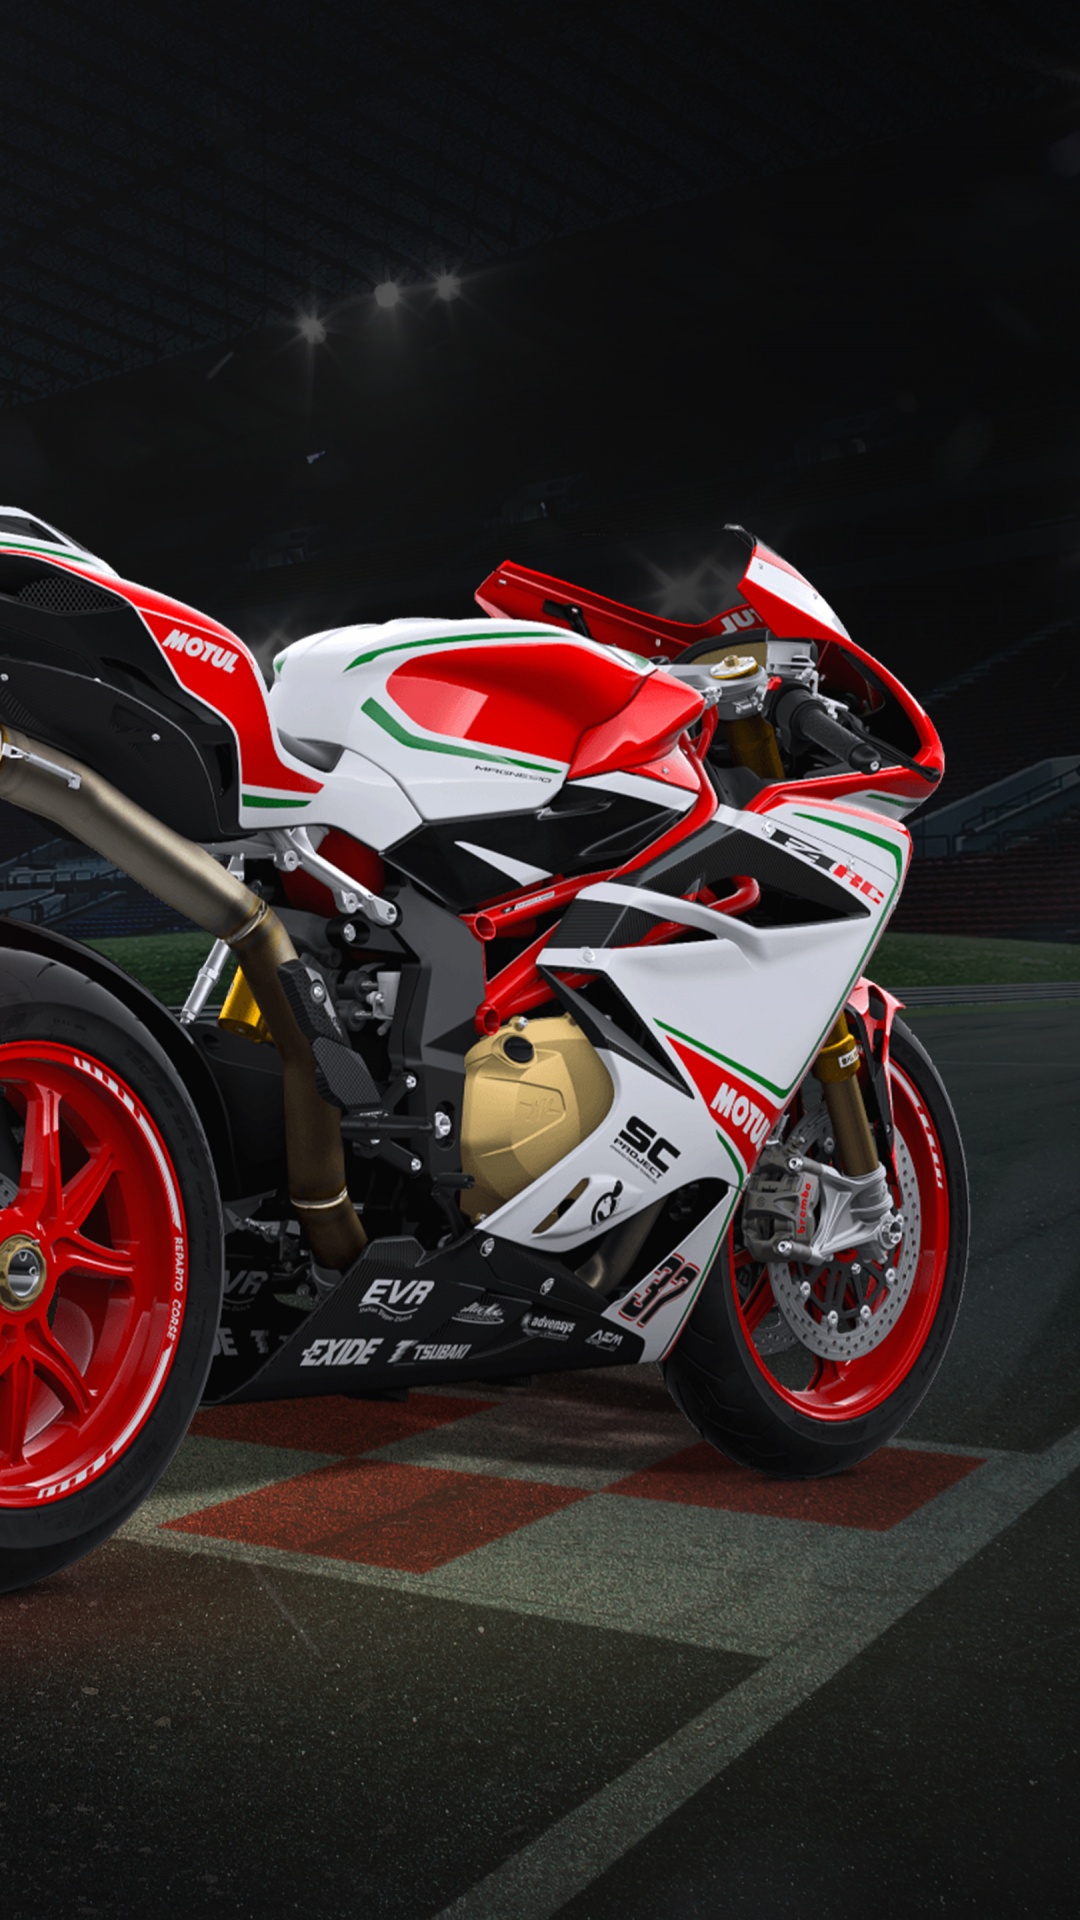 Red and White Sports Bike on Track Field. Wallpaper in 1080x1920 Resolution